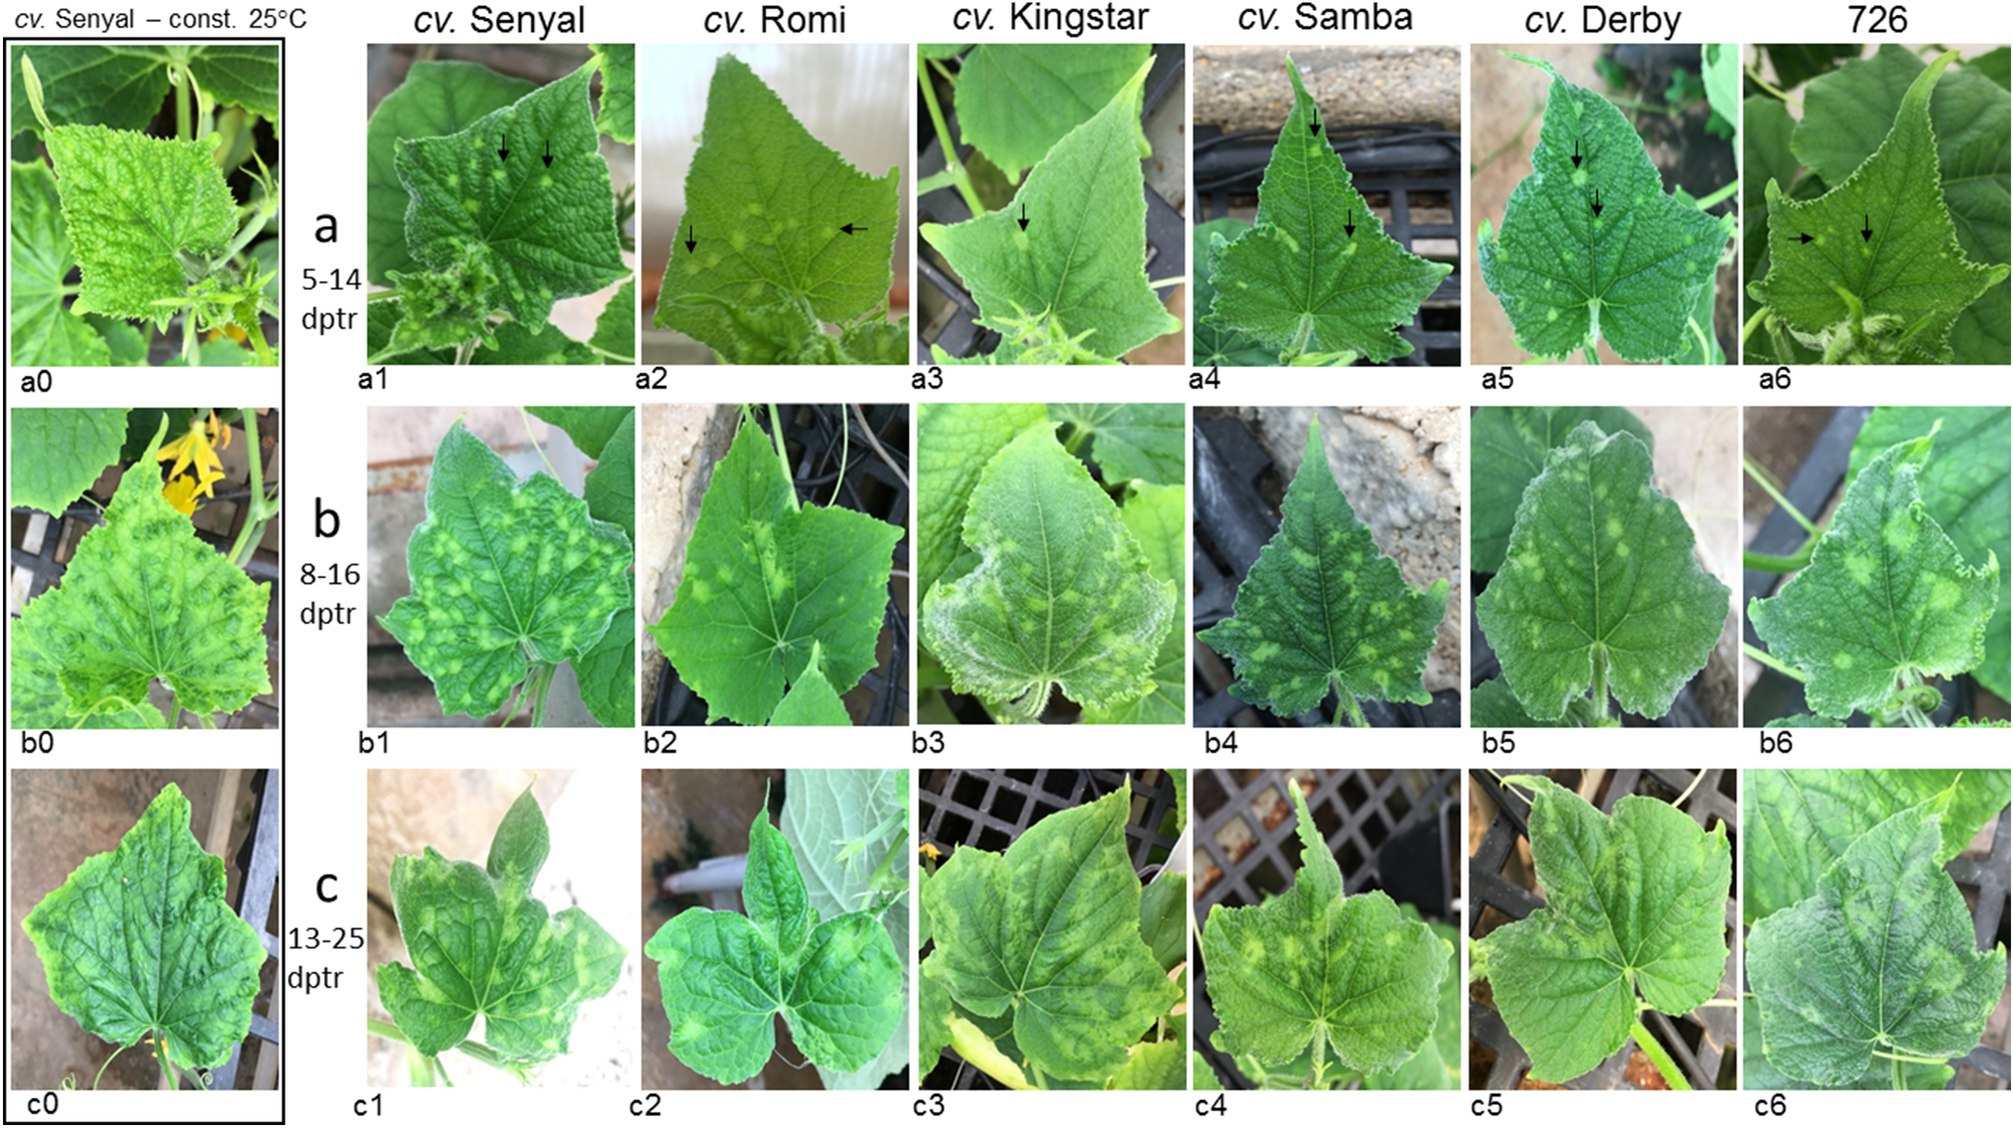 New early phenotypic markers for cucumber green mottle mosaic virus disease in cucumbers exposed fluctuating extreme | Scientific